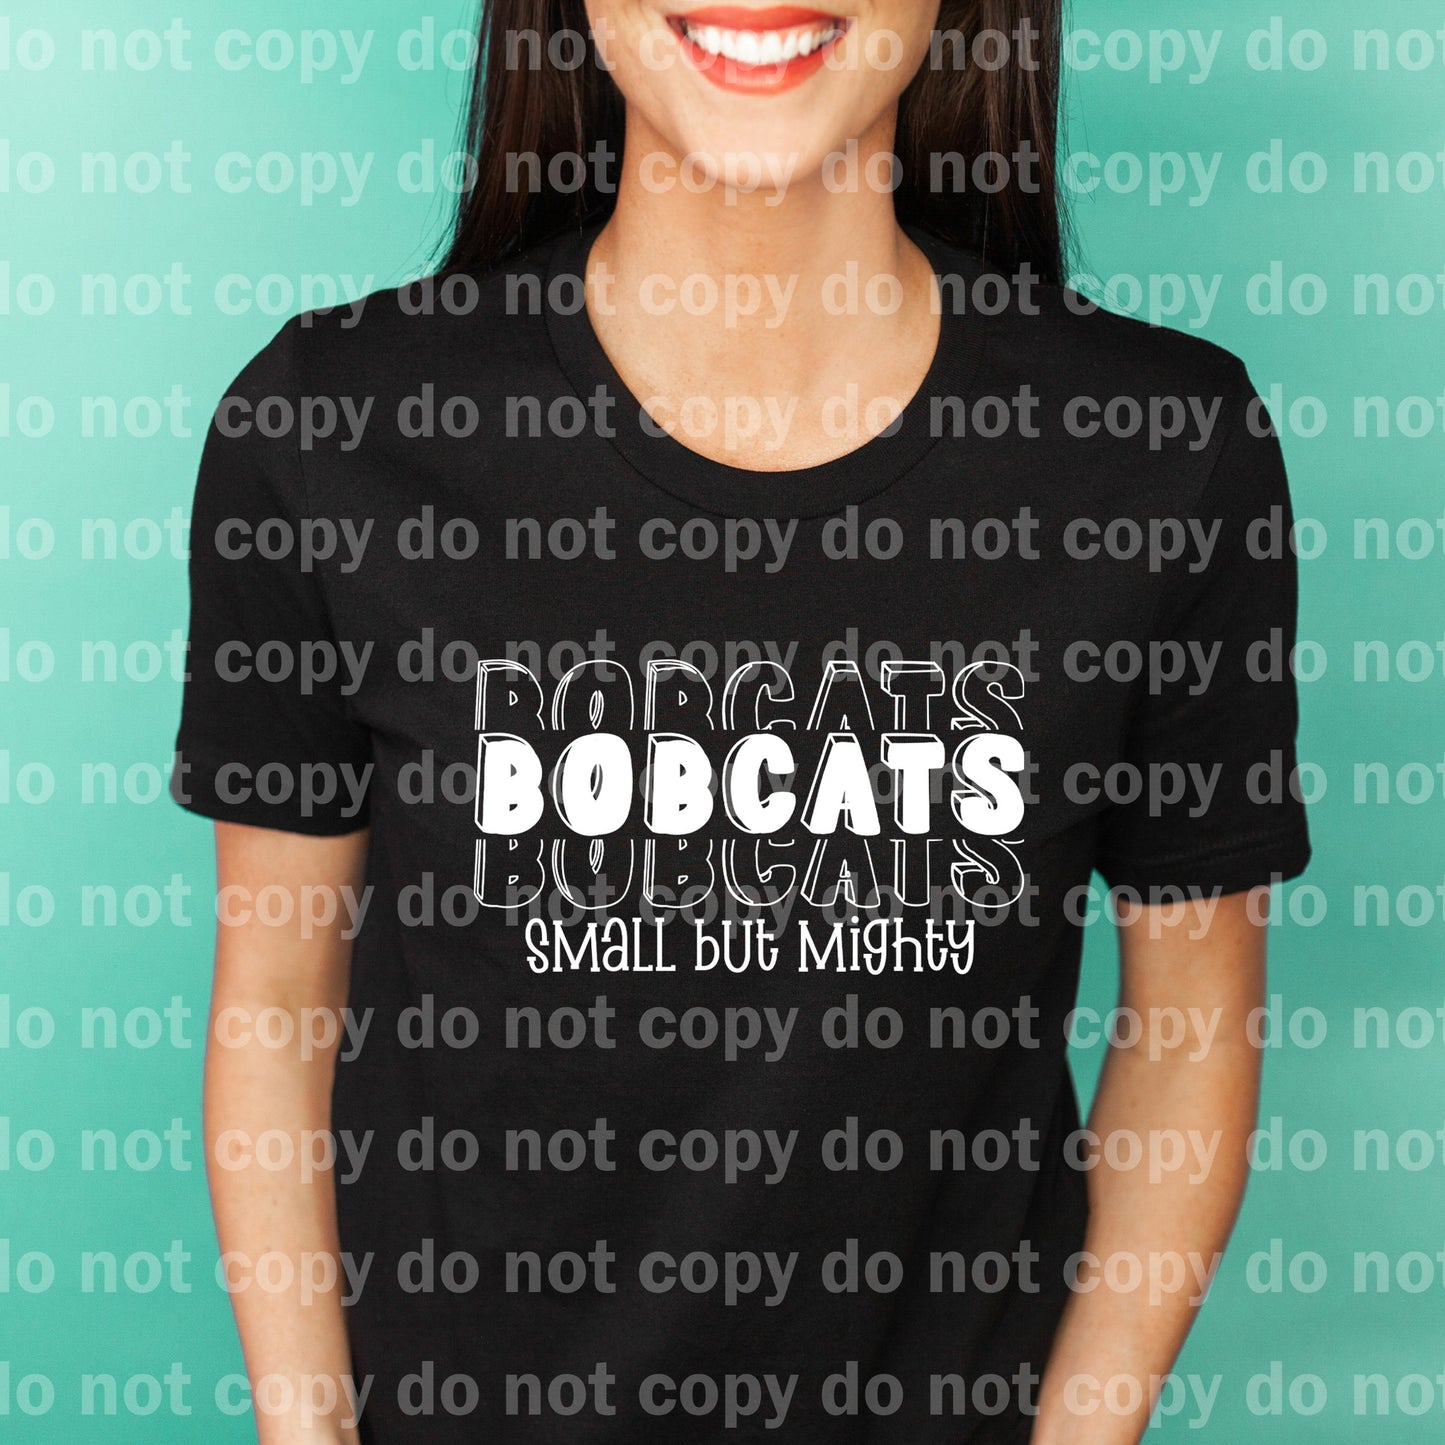 Bobcats Small But Mighty Black/White Dream Print or Sublimation Print